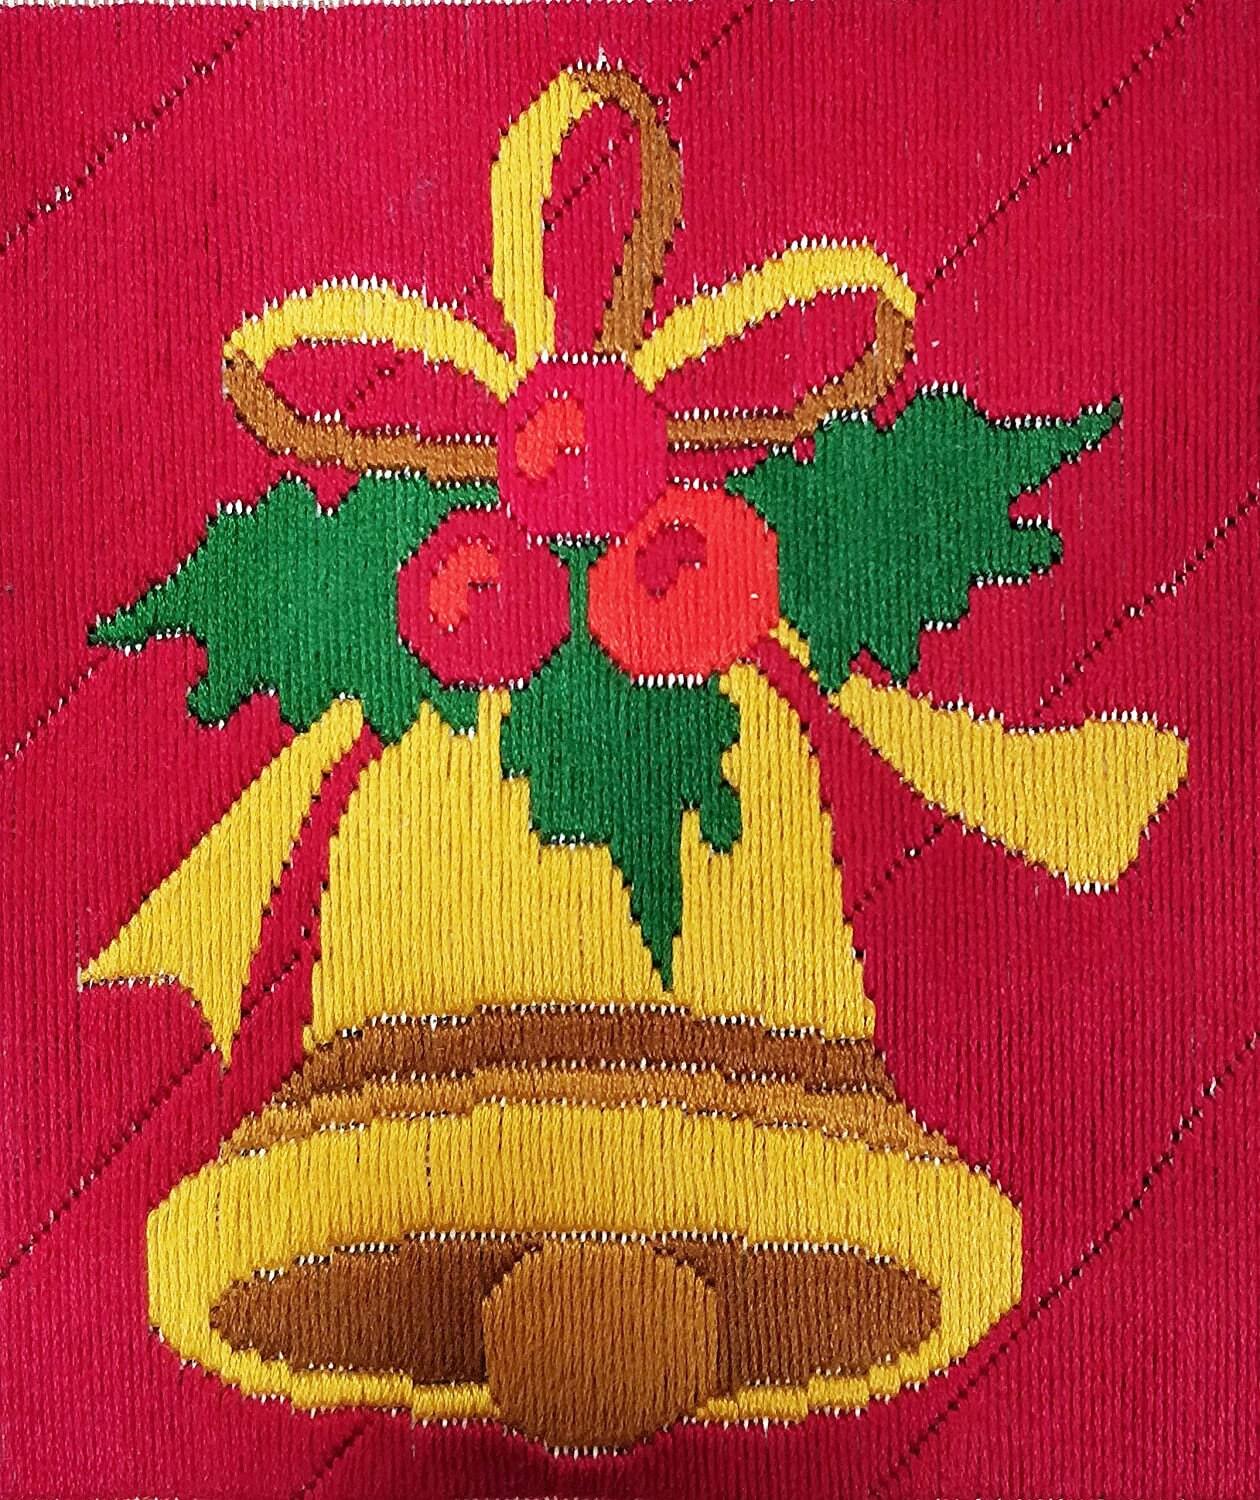 DIY Stitch Kit Christmas Special Embroidery Kits - Santa - Candy - Jingle Bell - Christmas Tree - Snow Man For kids gift purpose, home decor - Rajbharti Crafts